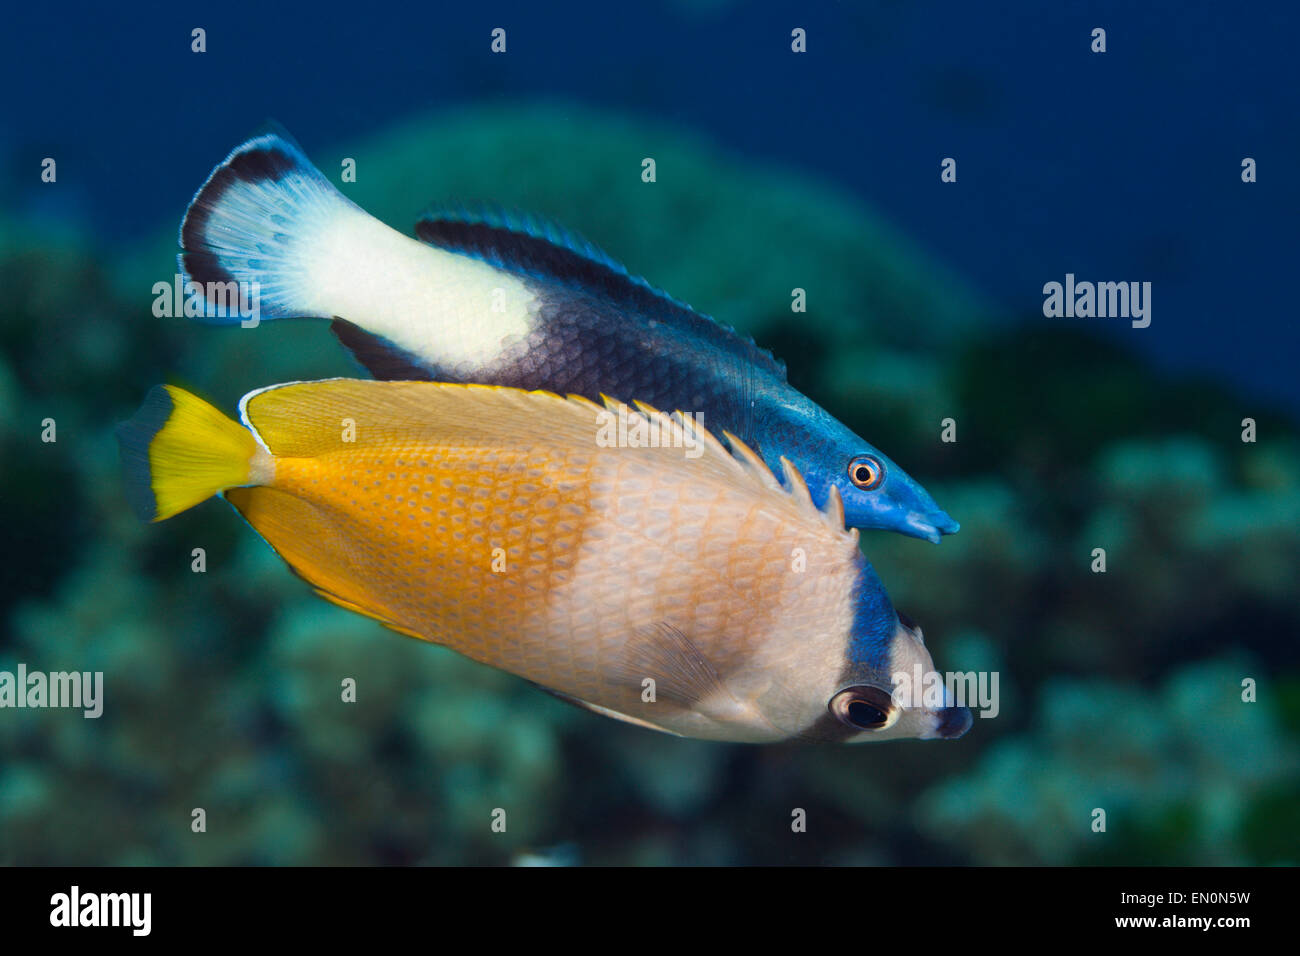 Kleins Butterflyfish and Bicolor Cleaner Wrasse, Chaetodon kleinii, Labroides bicolor, Great Barrier Reef, Australia Stock Photo